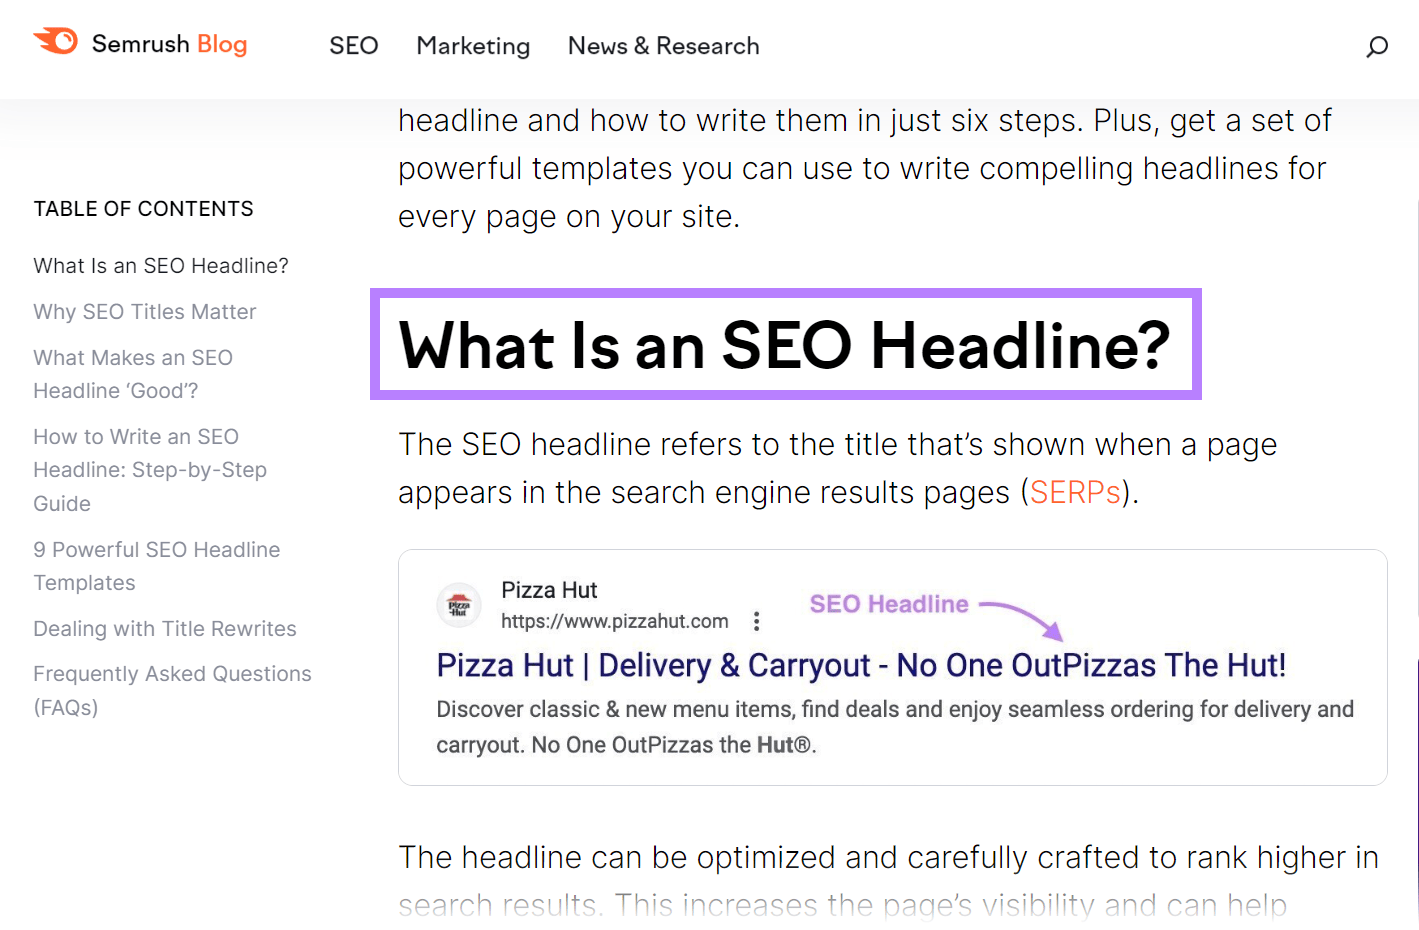 Semrush blog post with 'What Is an SEO Headline?' H2 highlighted.